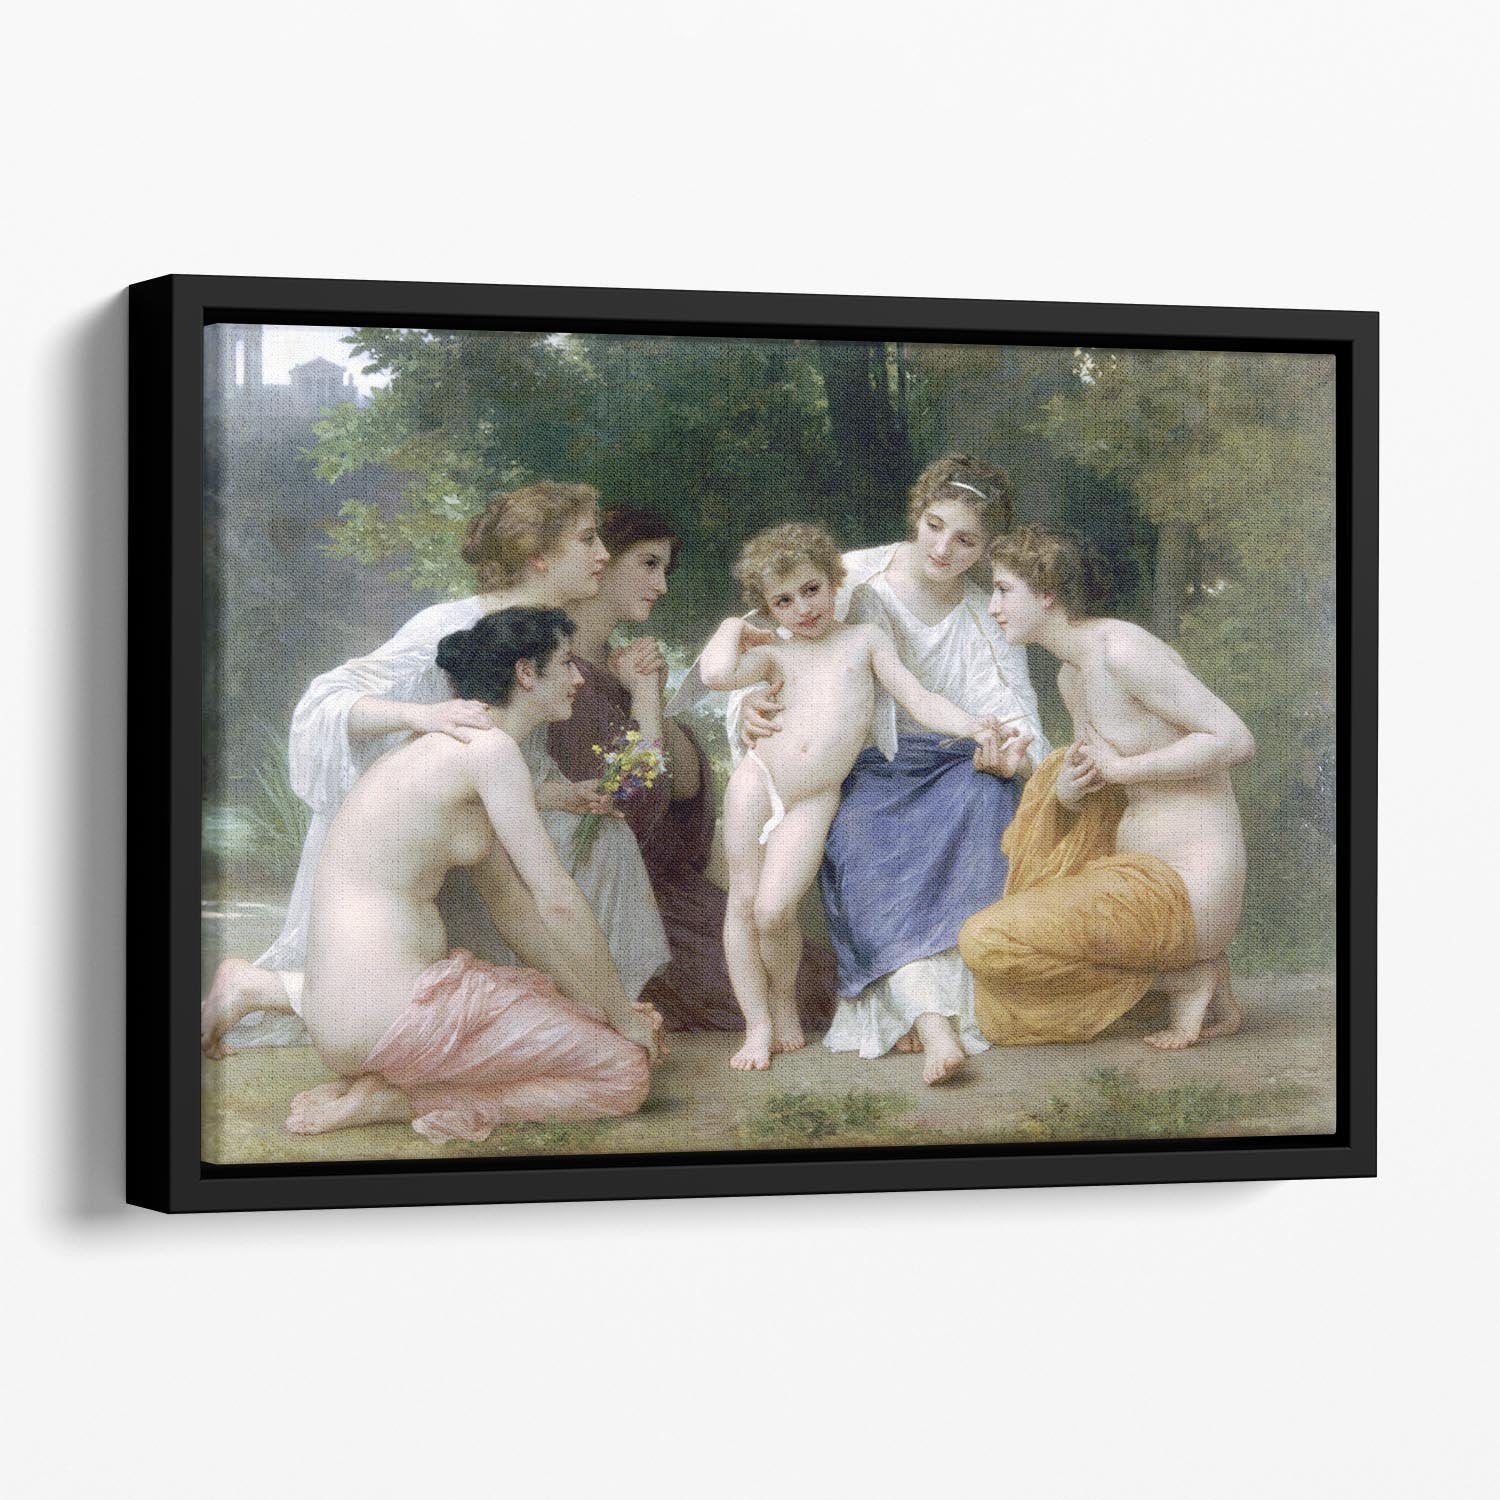 Admiration By Bouguereau Floating Framed Canvas